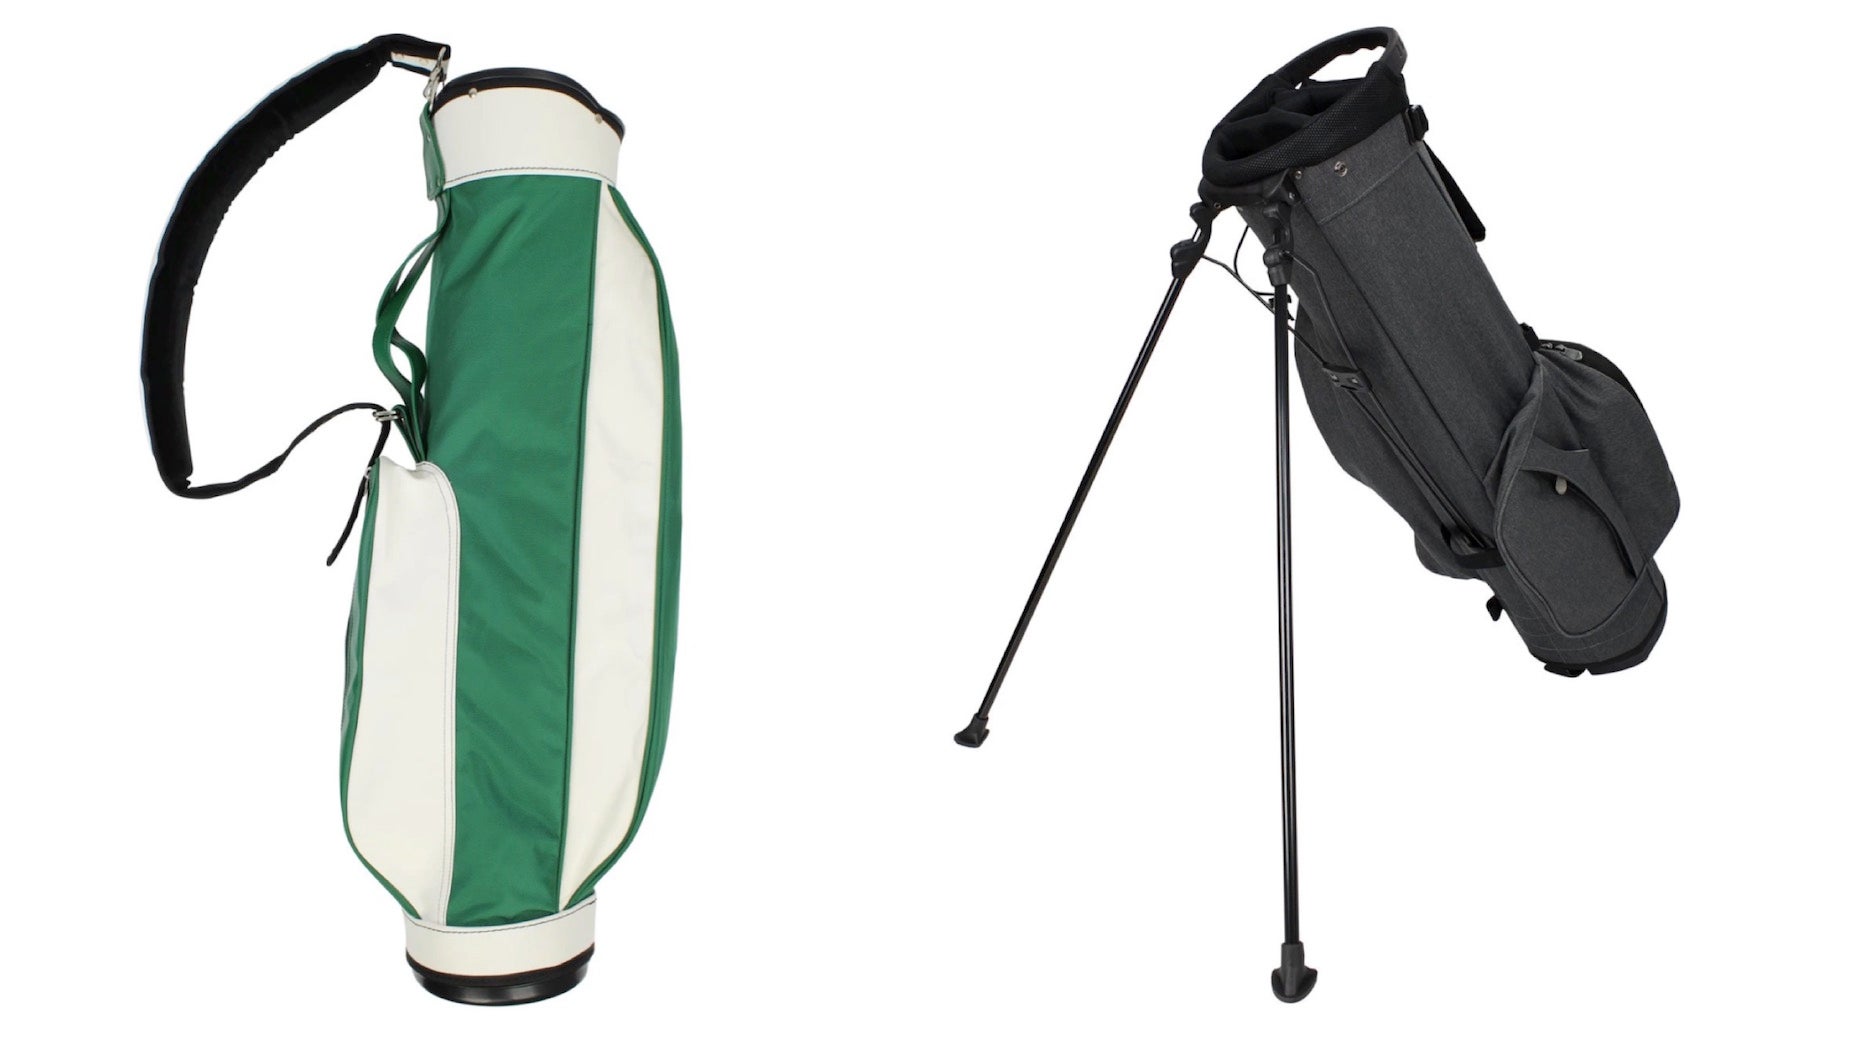 Isaac at styre Elektrisk Best golf gifts 2021: 7 golf bags for all types of golfers